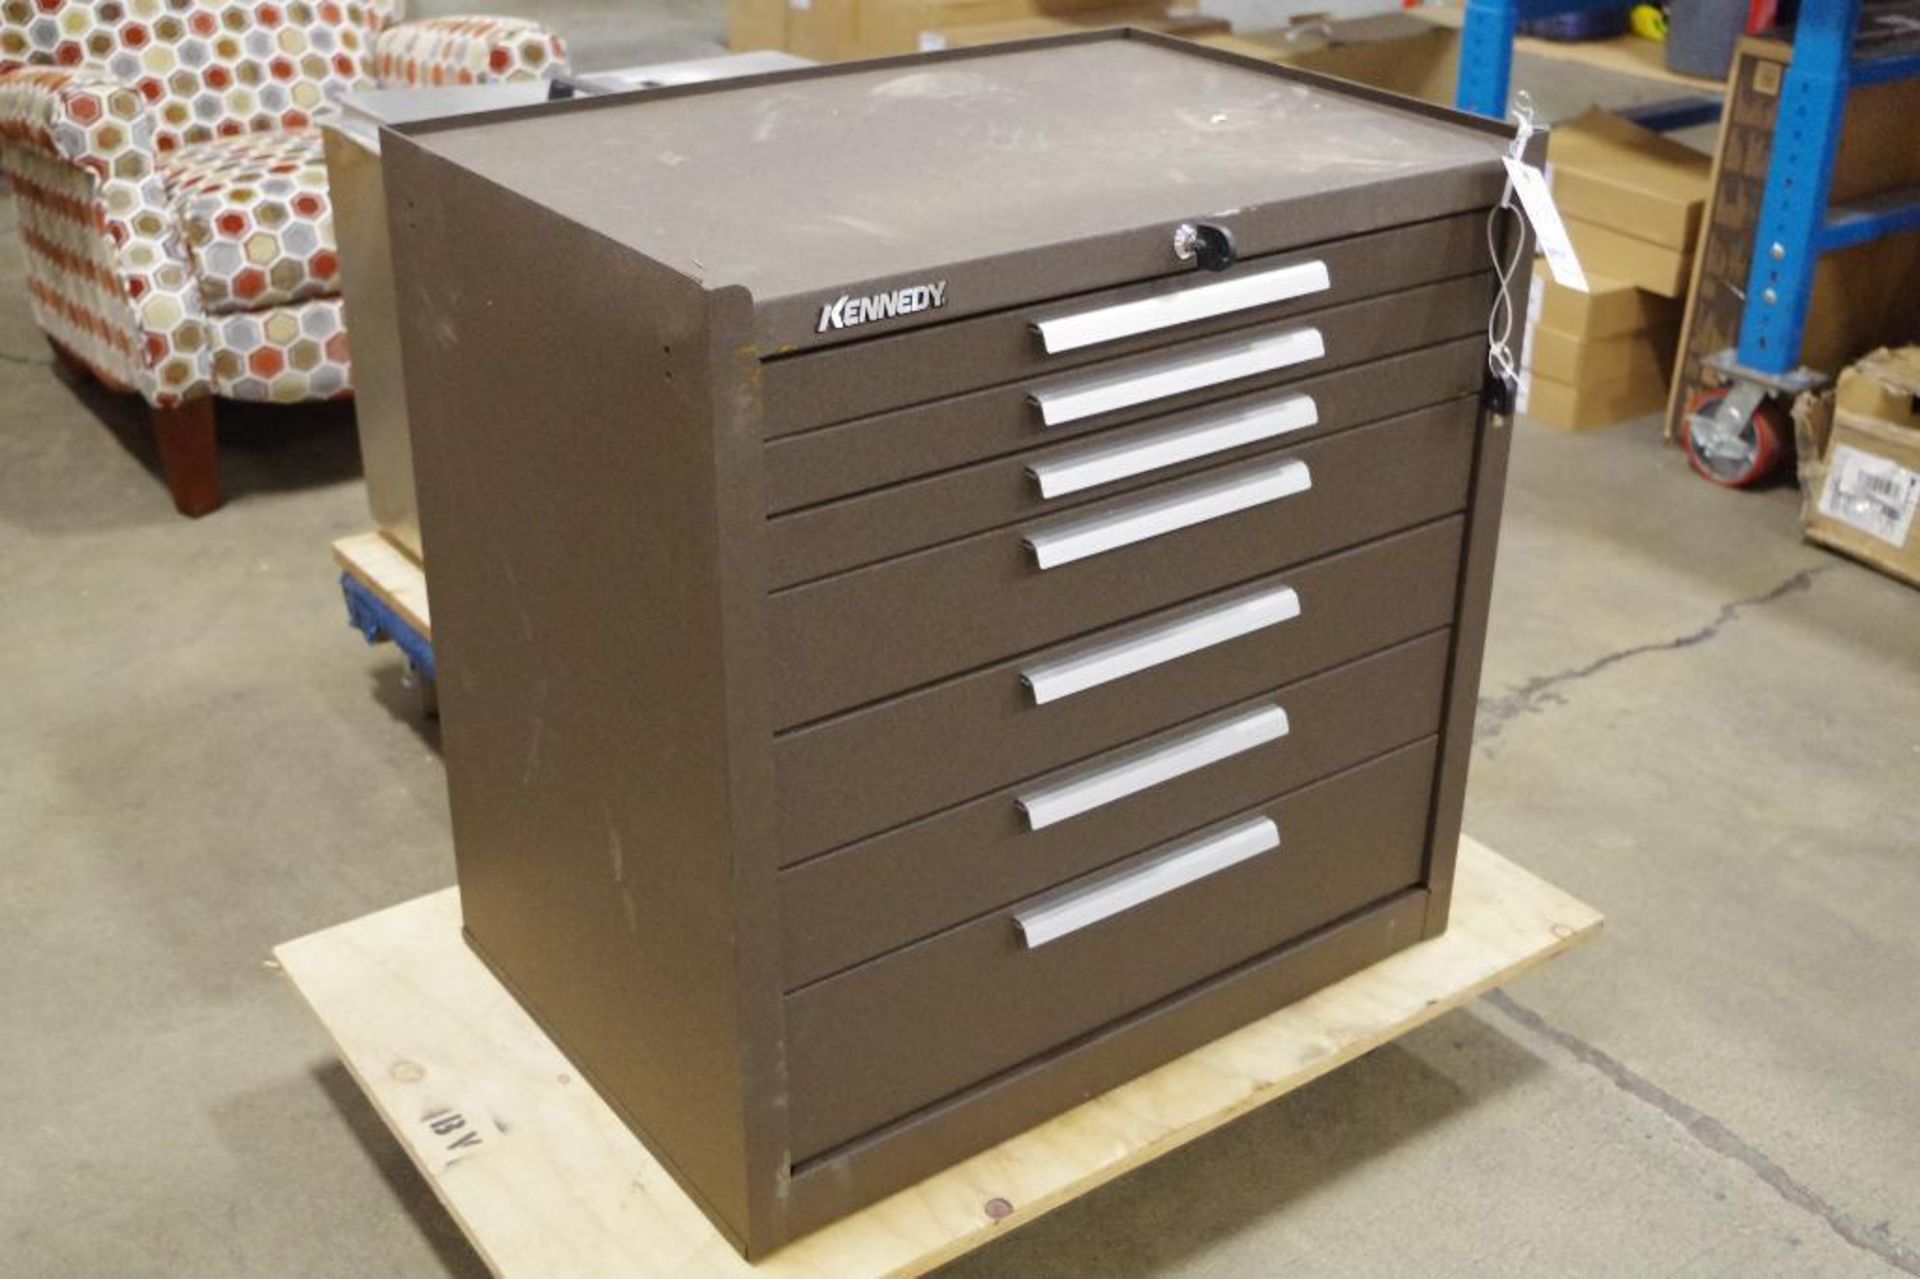 KENNEY Freight Damage Tool Box w/ Key Size: 29"W x 20"D x29"H (Unable to get it to open)